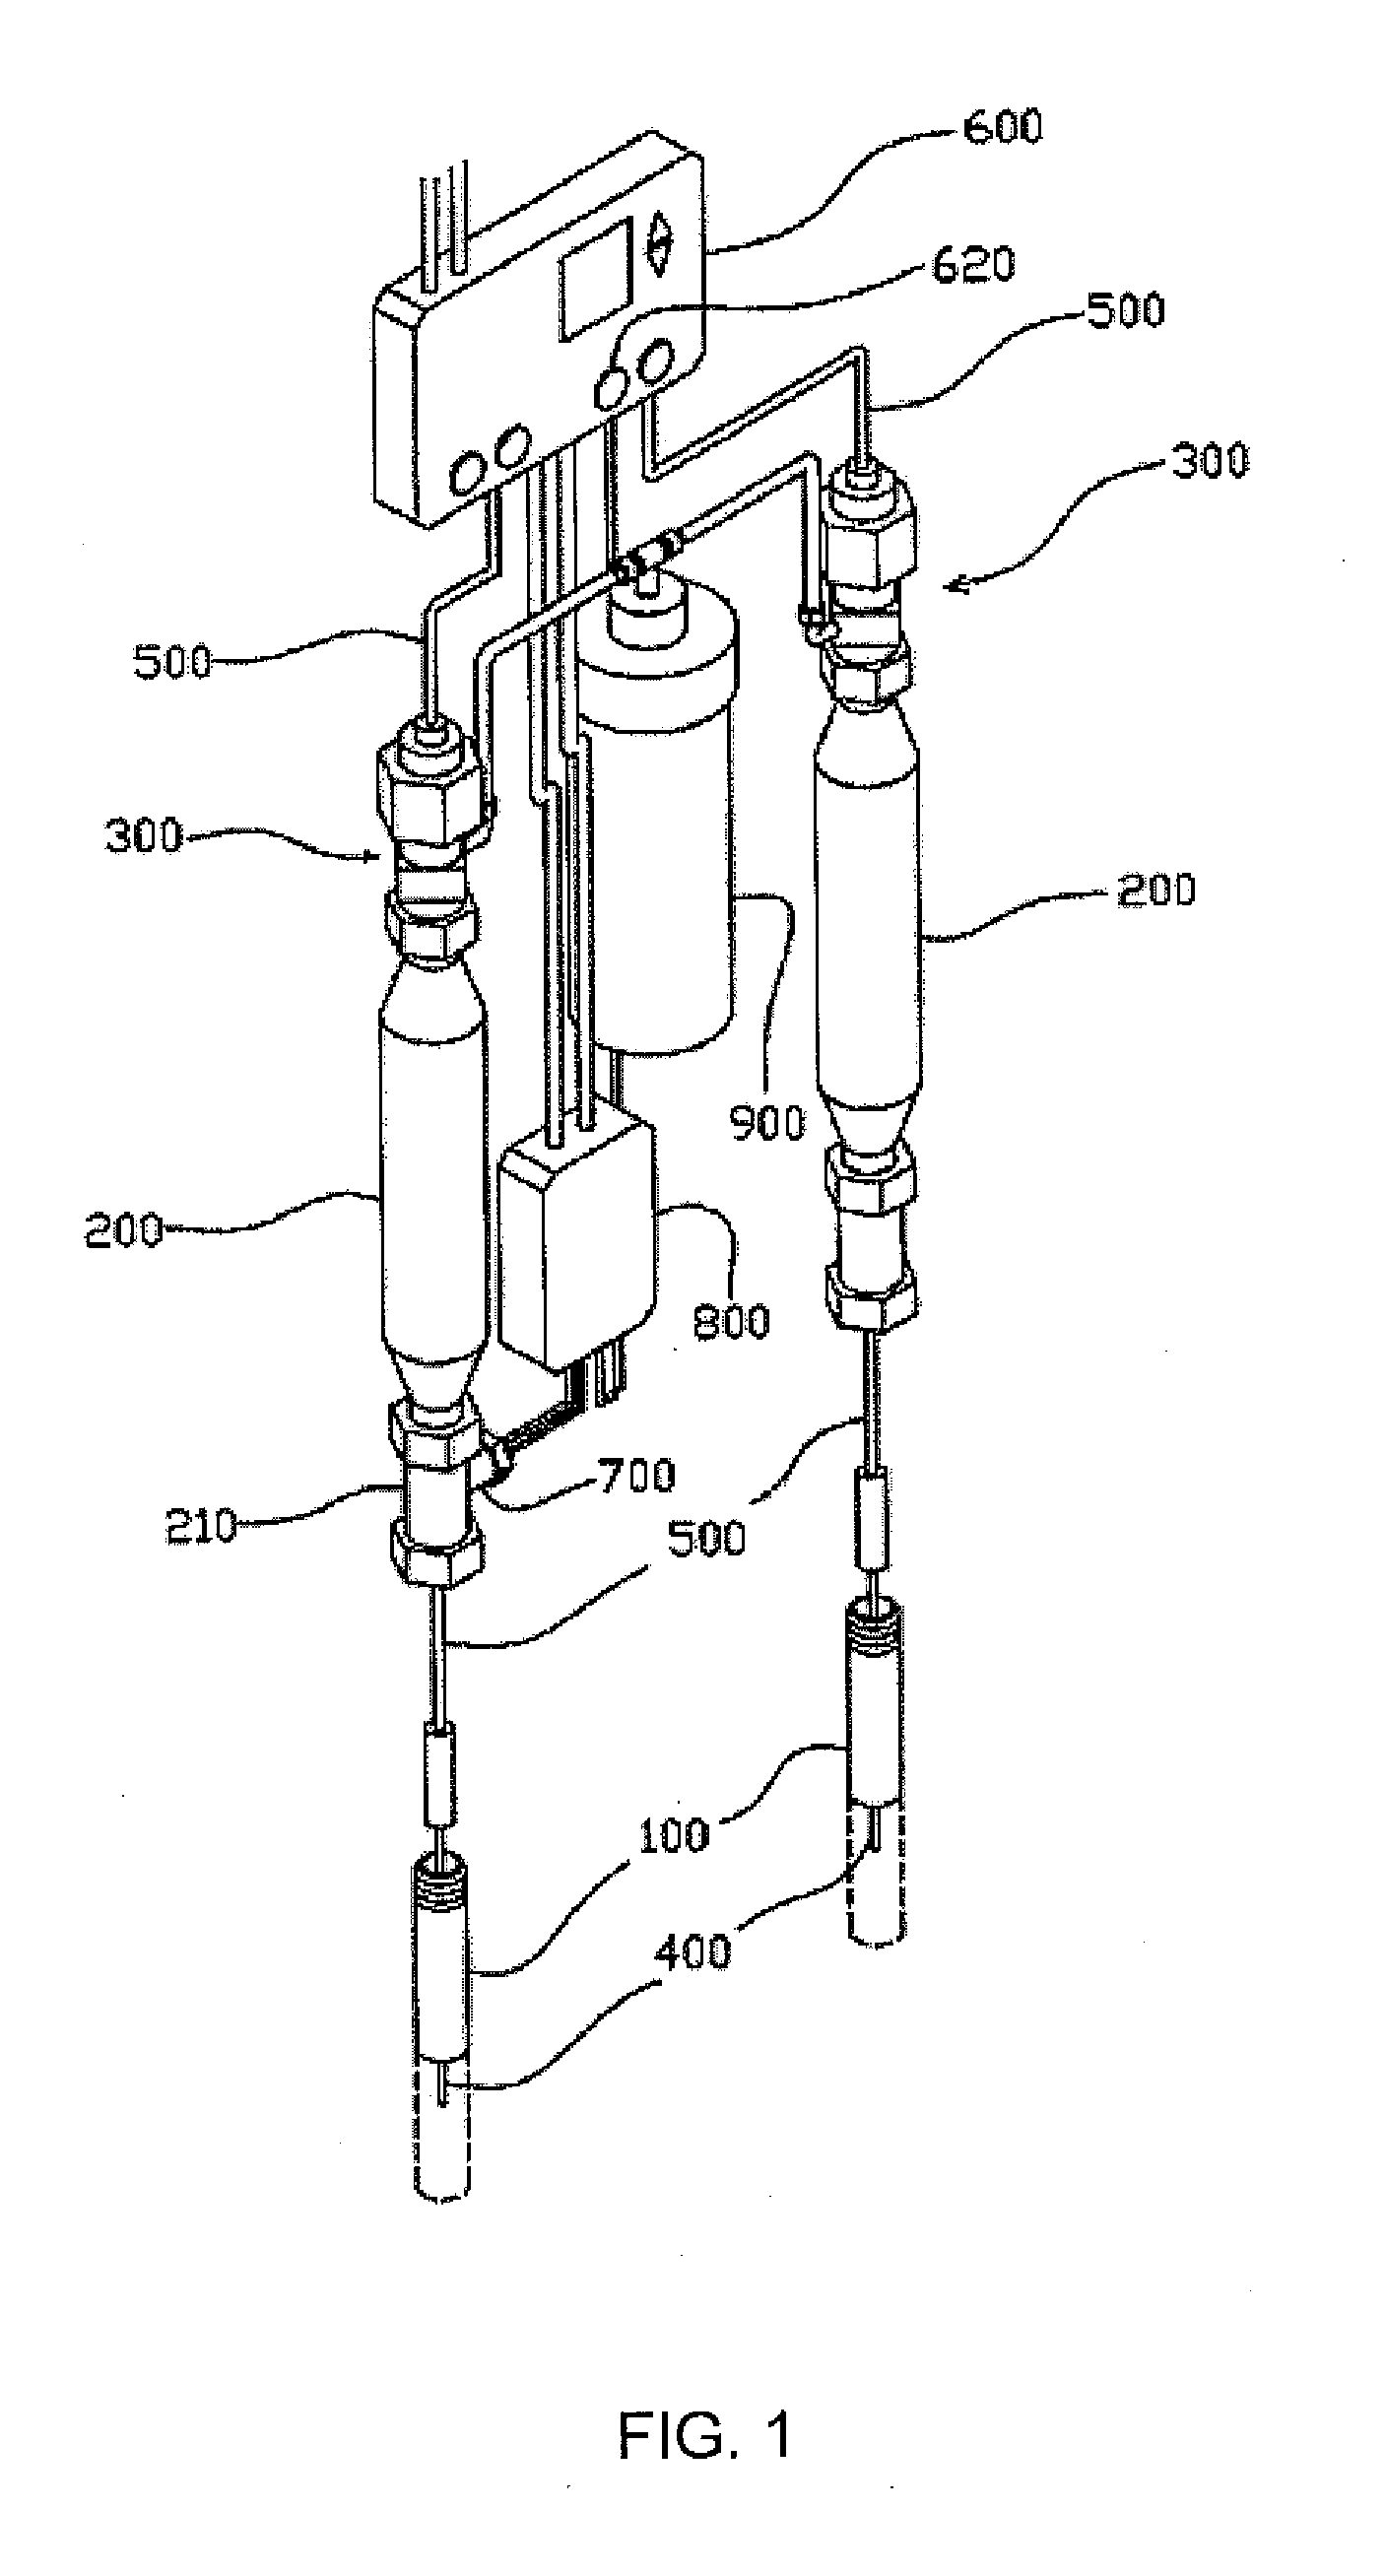 Structure of hot water pipe inserted with heating wire